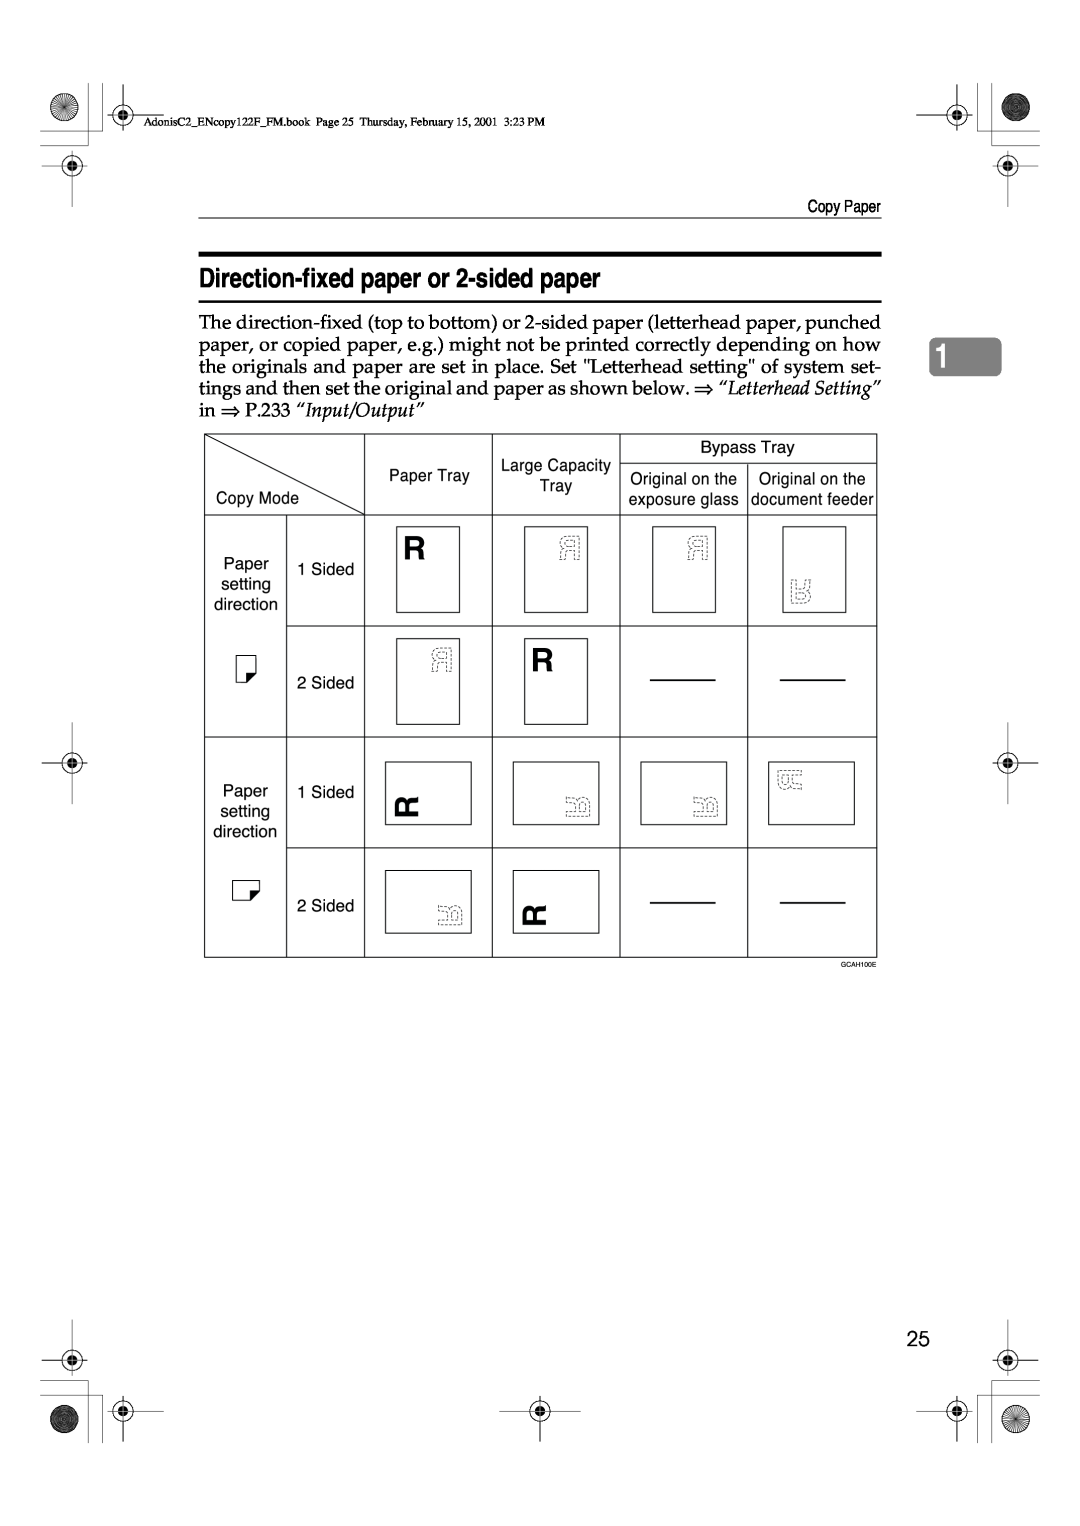 Savin 2235, 3502/3502p, 4502/4502p, 2545/2545p, 2245, 2535/2535p manual Direction-fixed paper or 2-sided paper, Copy Paper 